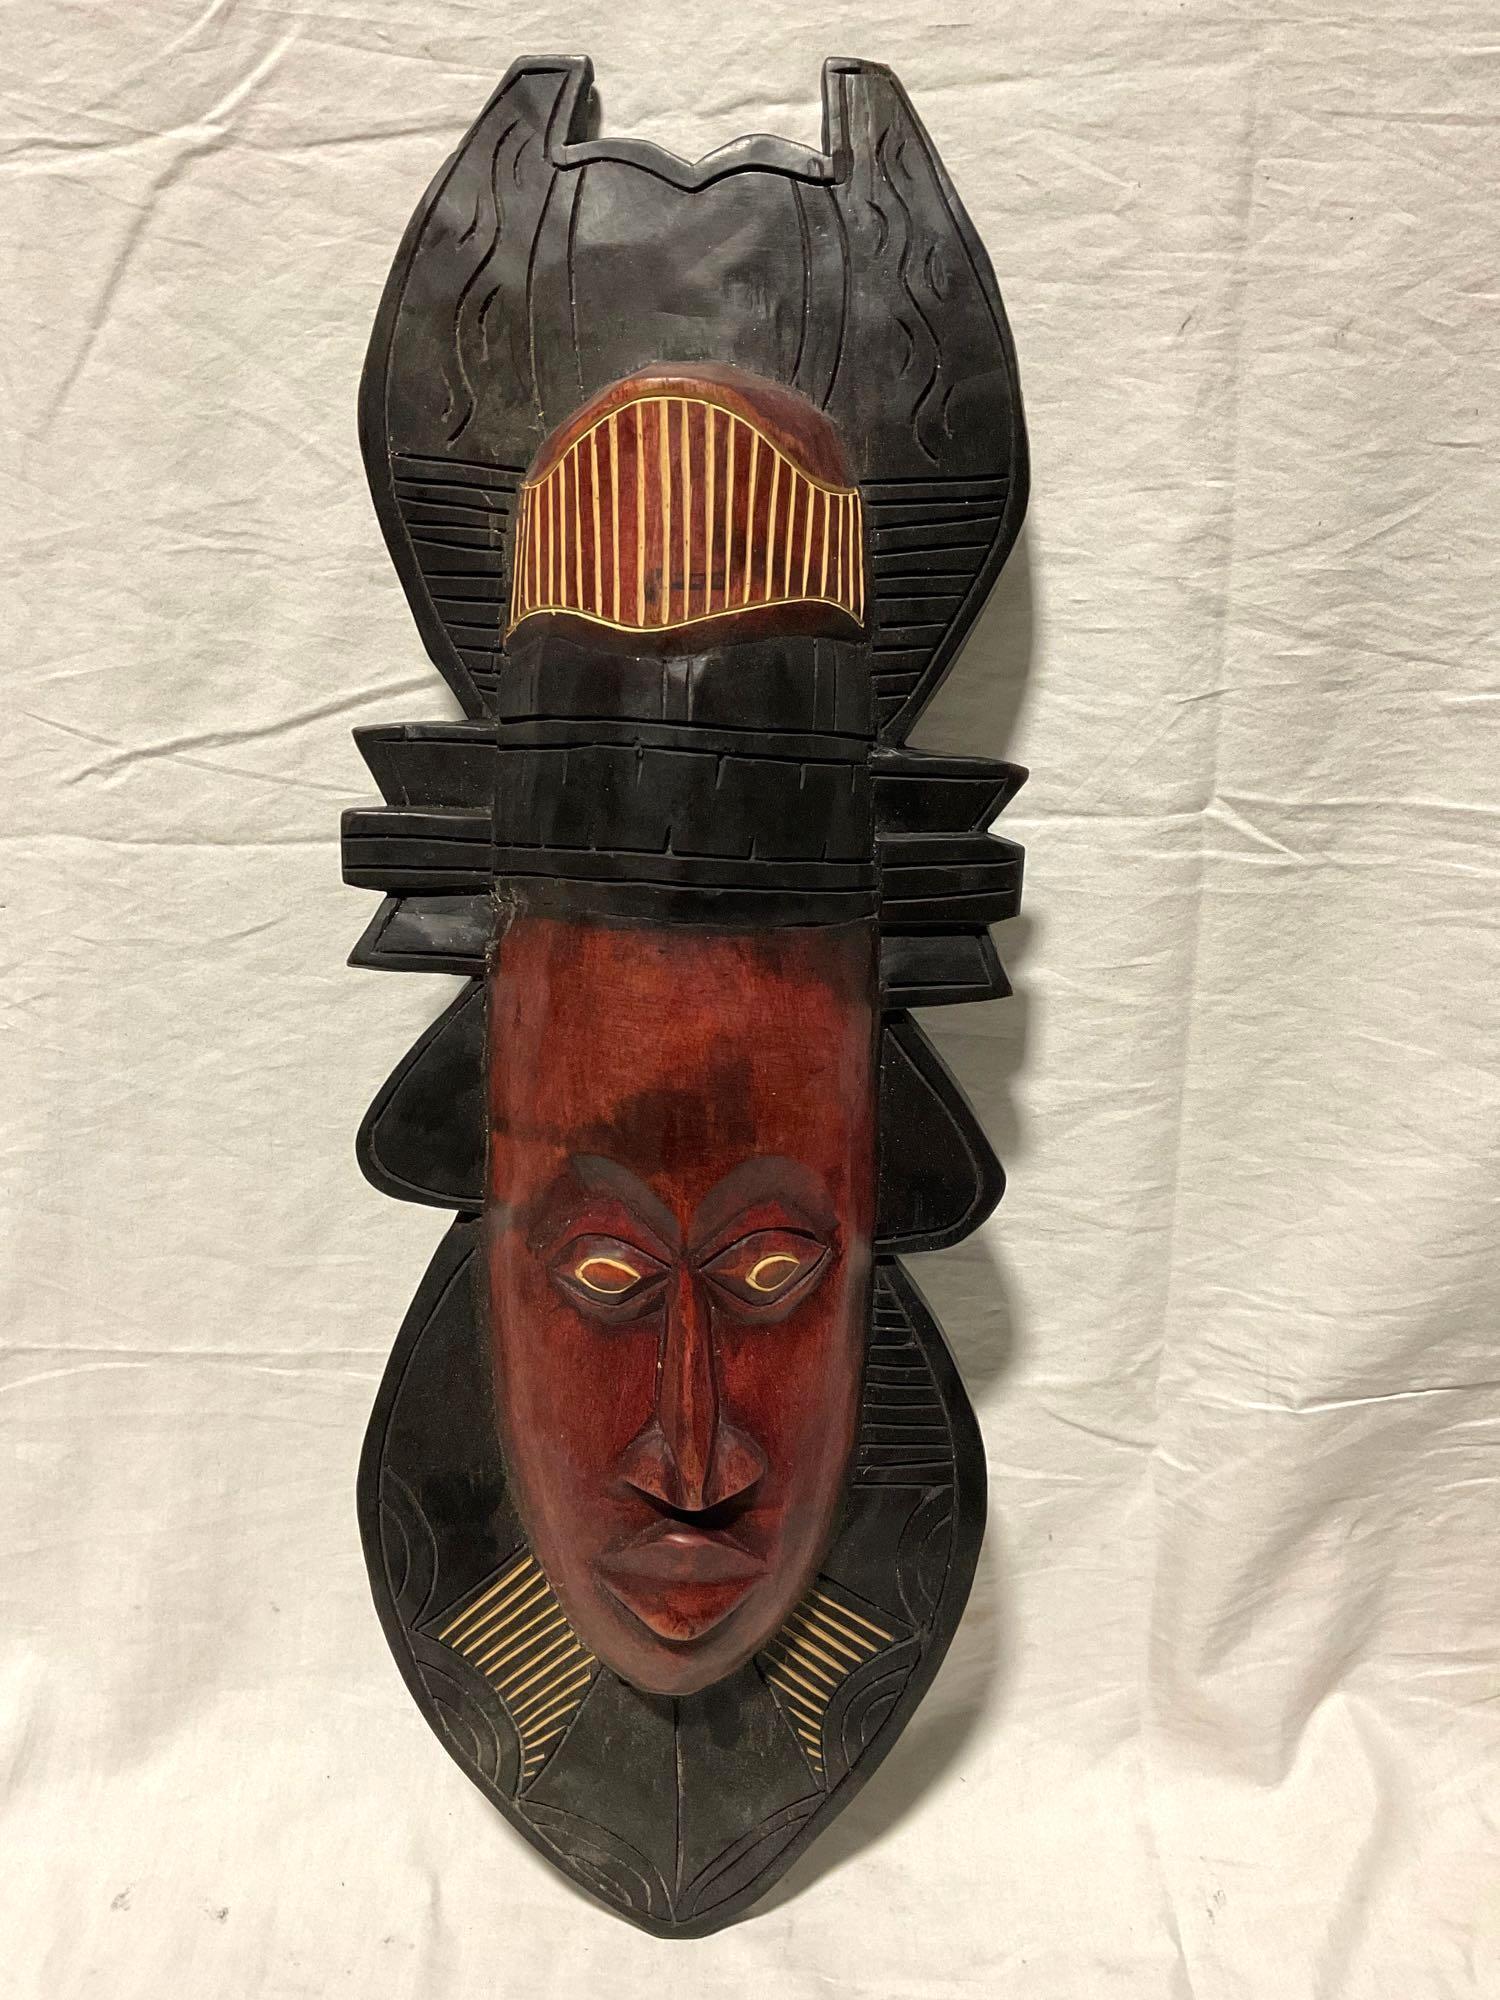 Very Unique Hand Carved Wood Tribal Mask from Ghana see pics